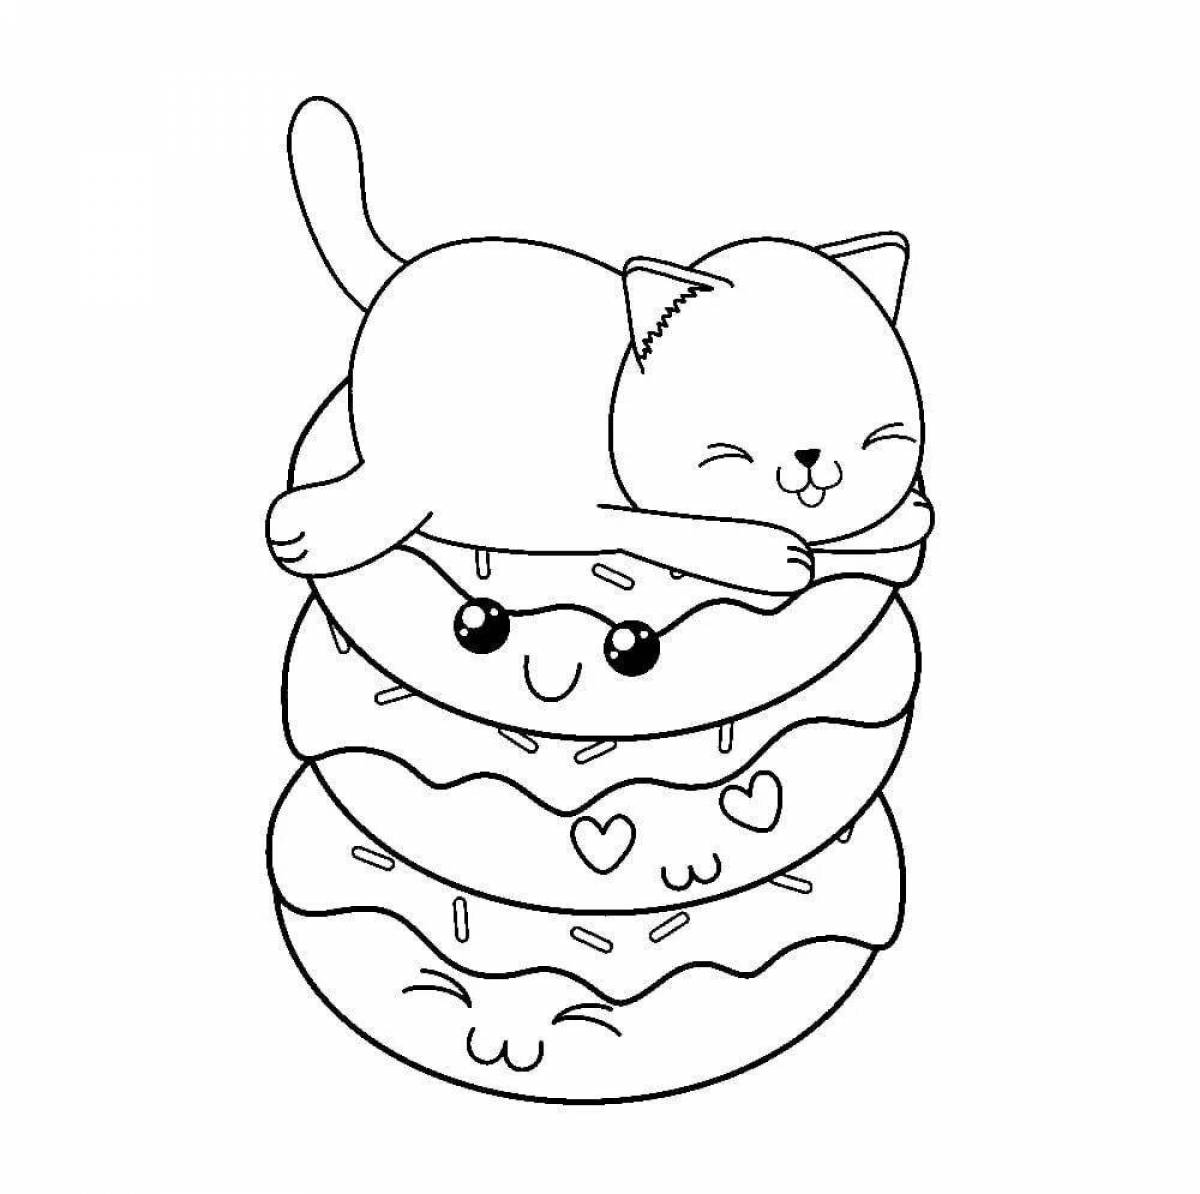 Lovely cat donut coloring page